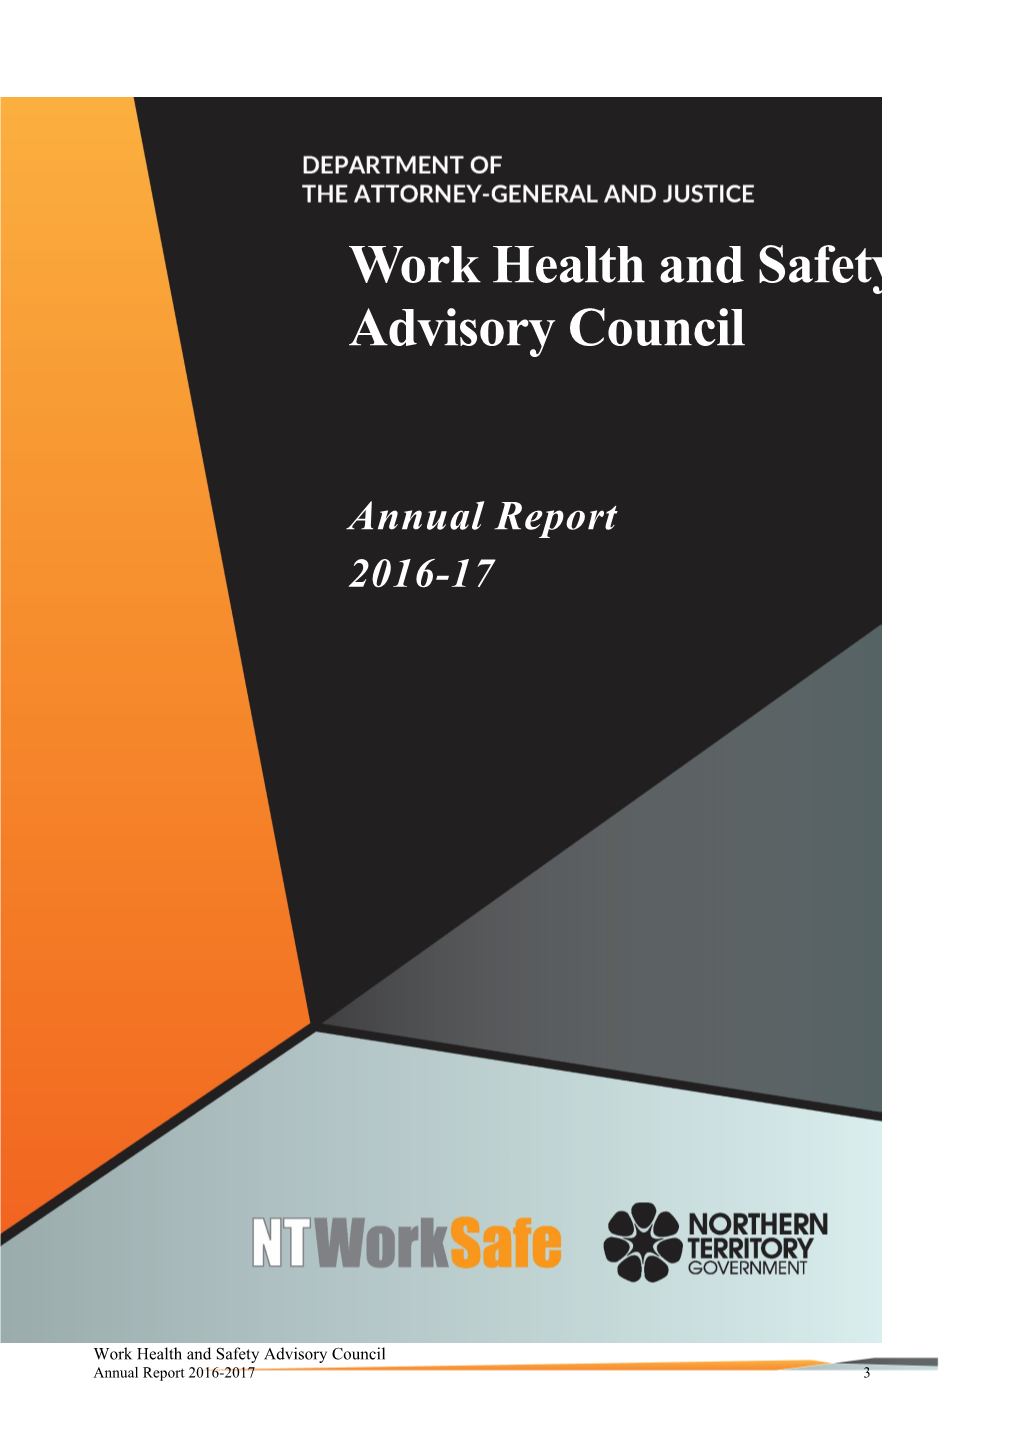 Work Health and Safety Advisory Council Annual Report 2016-2017